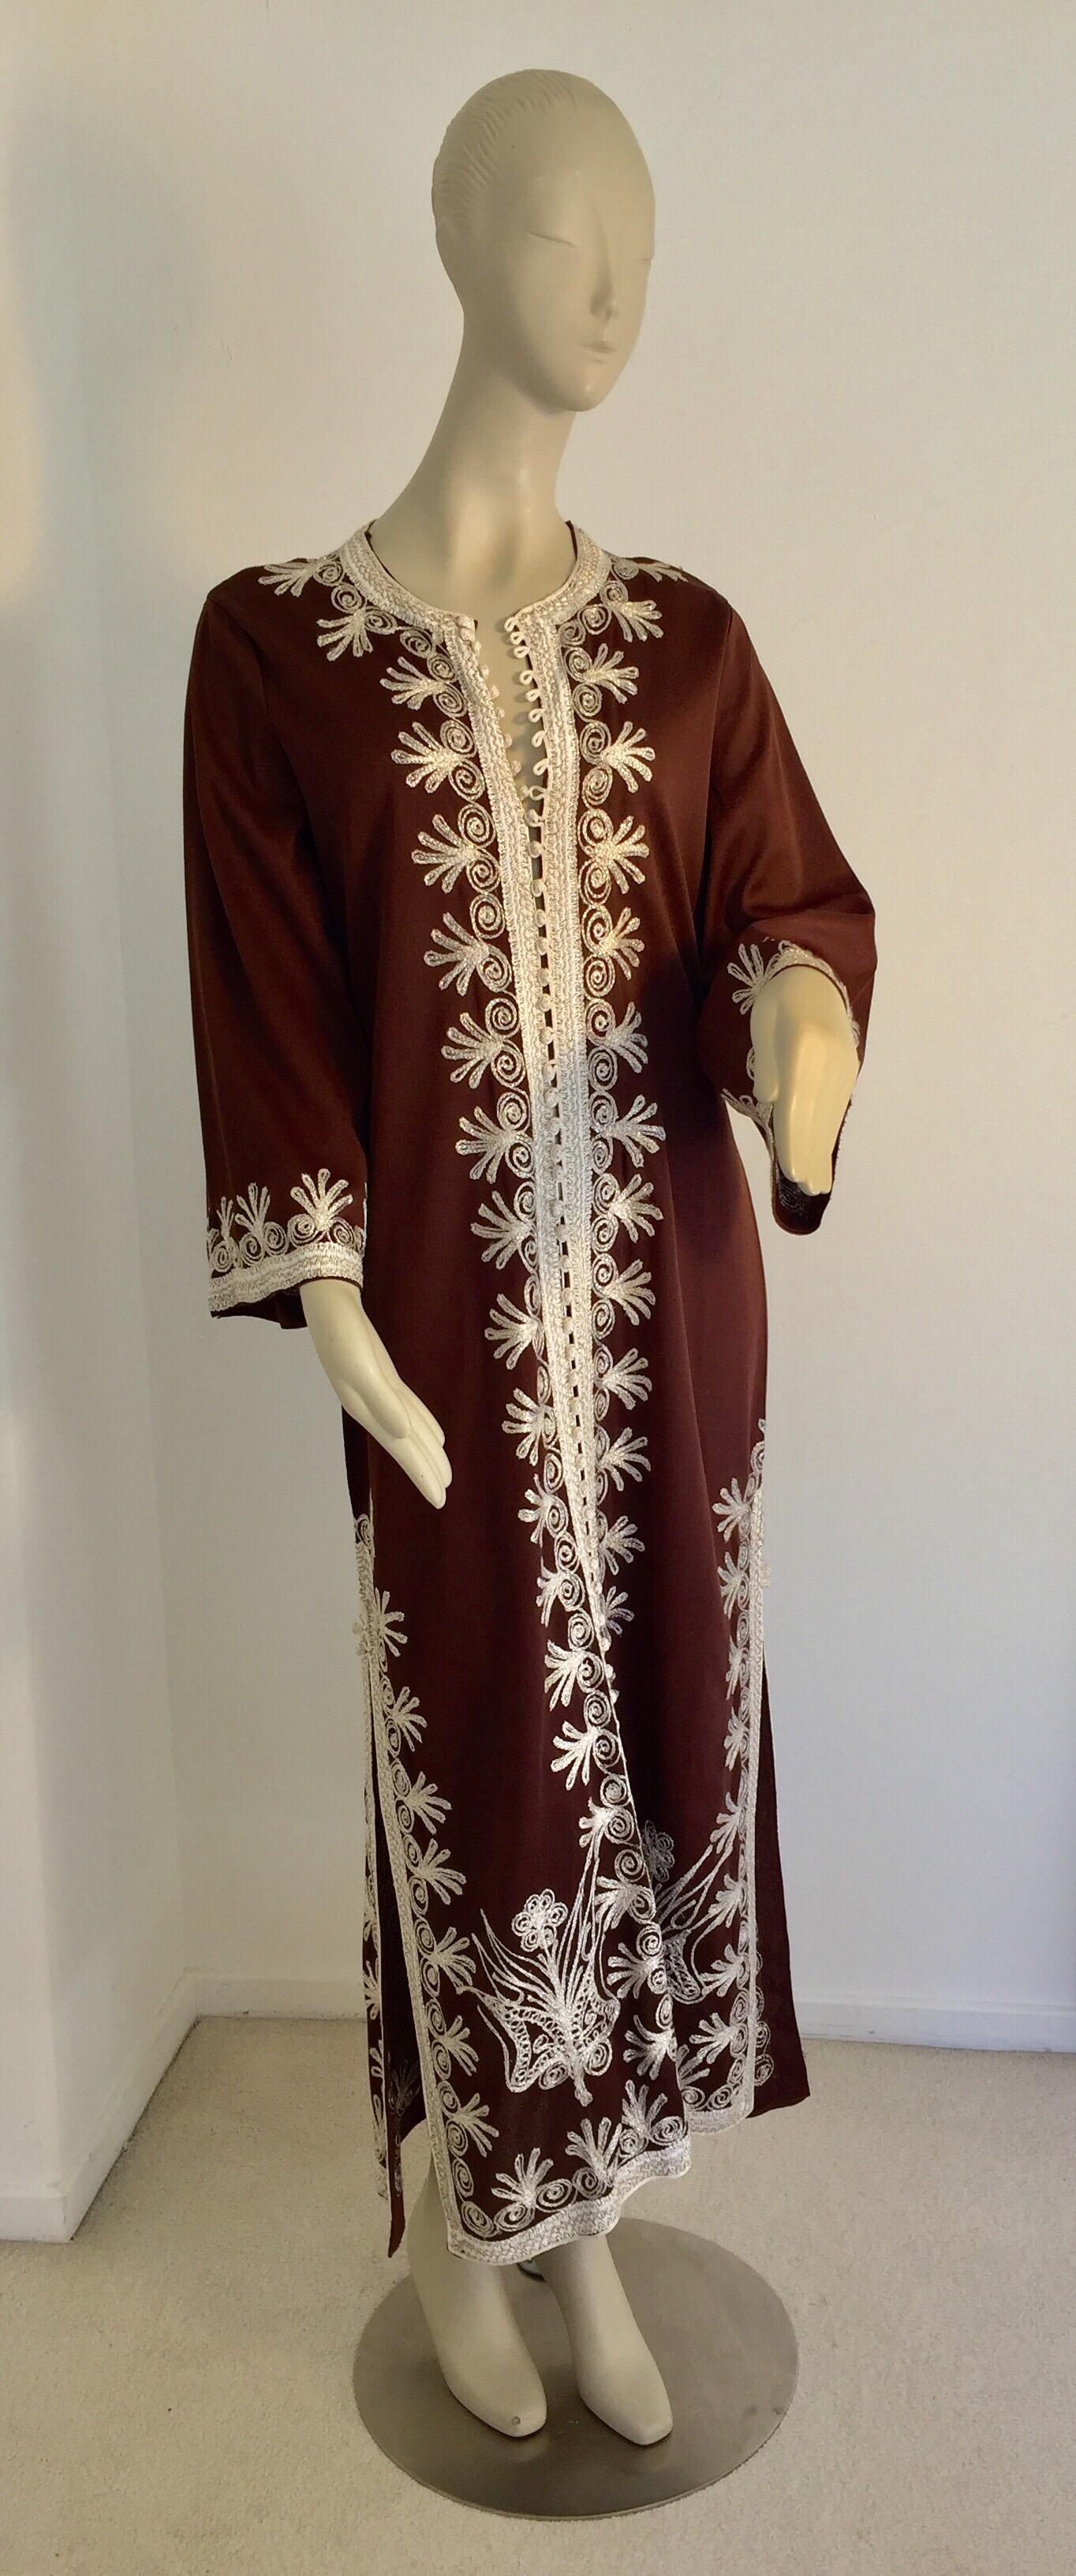 Elegant Moroccan caftan embroidered charcoal grey color with gold threads, 
circa 1970s.
This long maxi dress kaftan features a traditional Egyptian neckline, with side slits and embellished sleeves with gold Moorish designs.
In Morocco, fashion